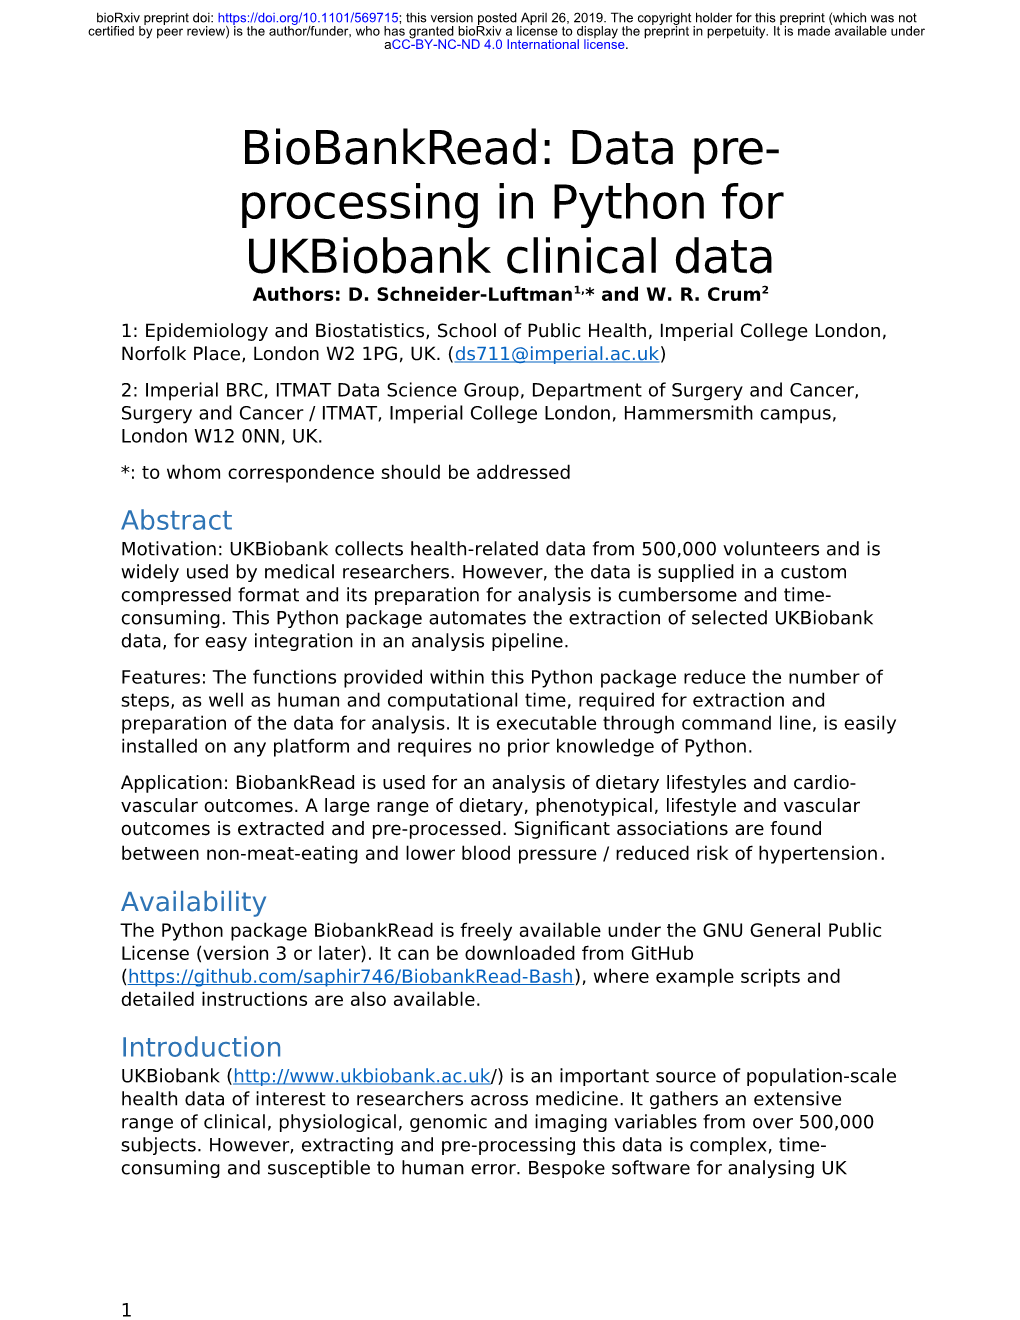 Biobankread: Data Pre-Processing in Python for Ukbiobank Clinical Data